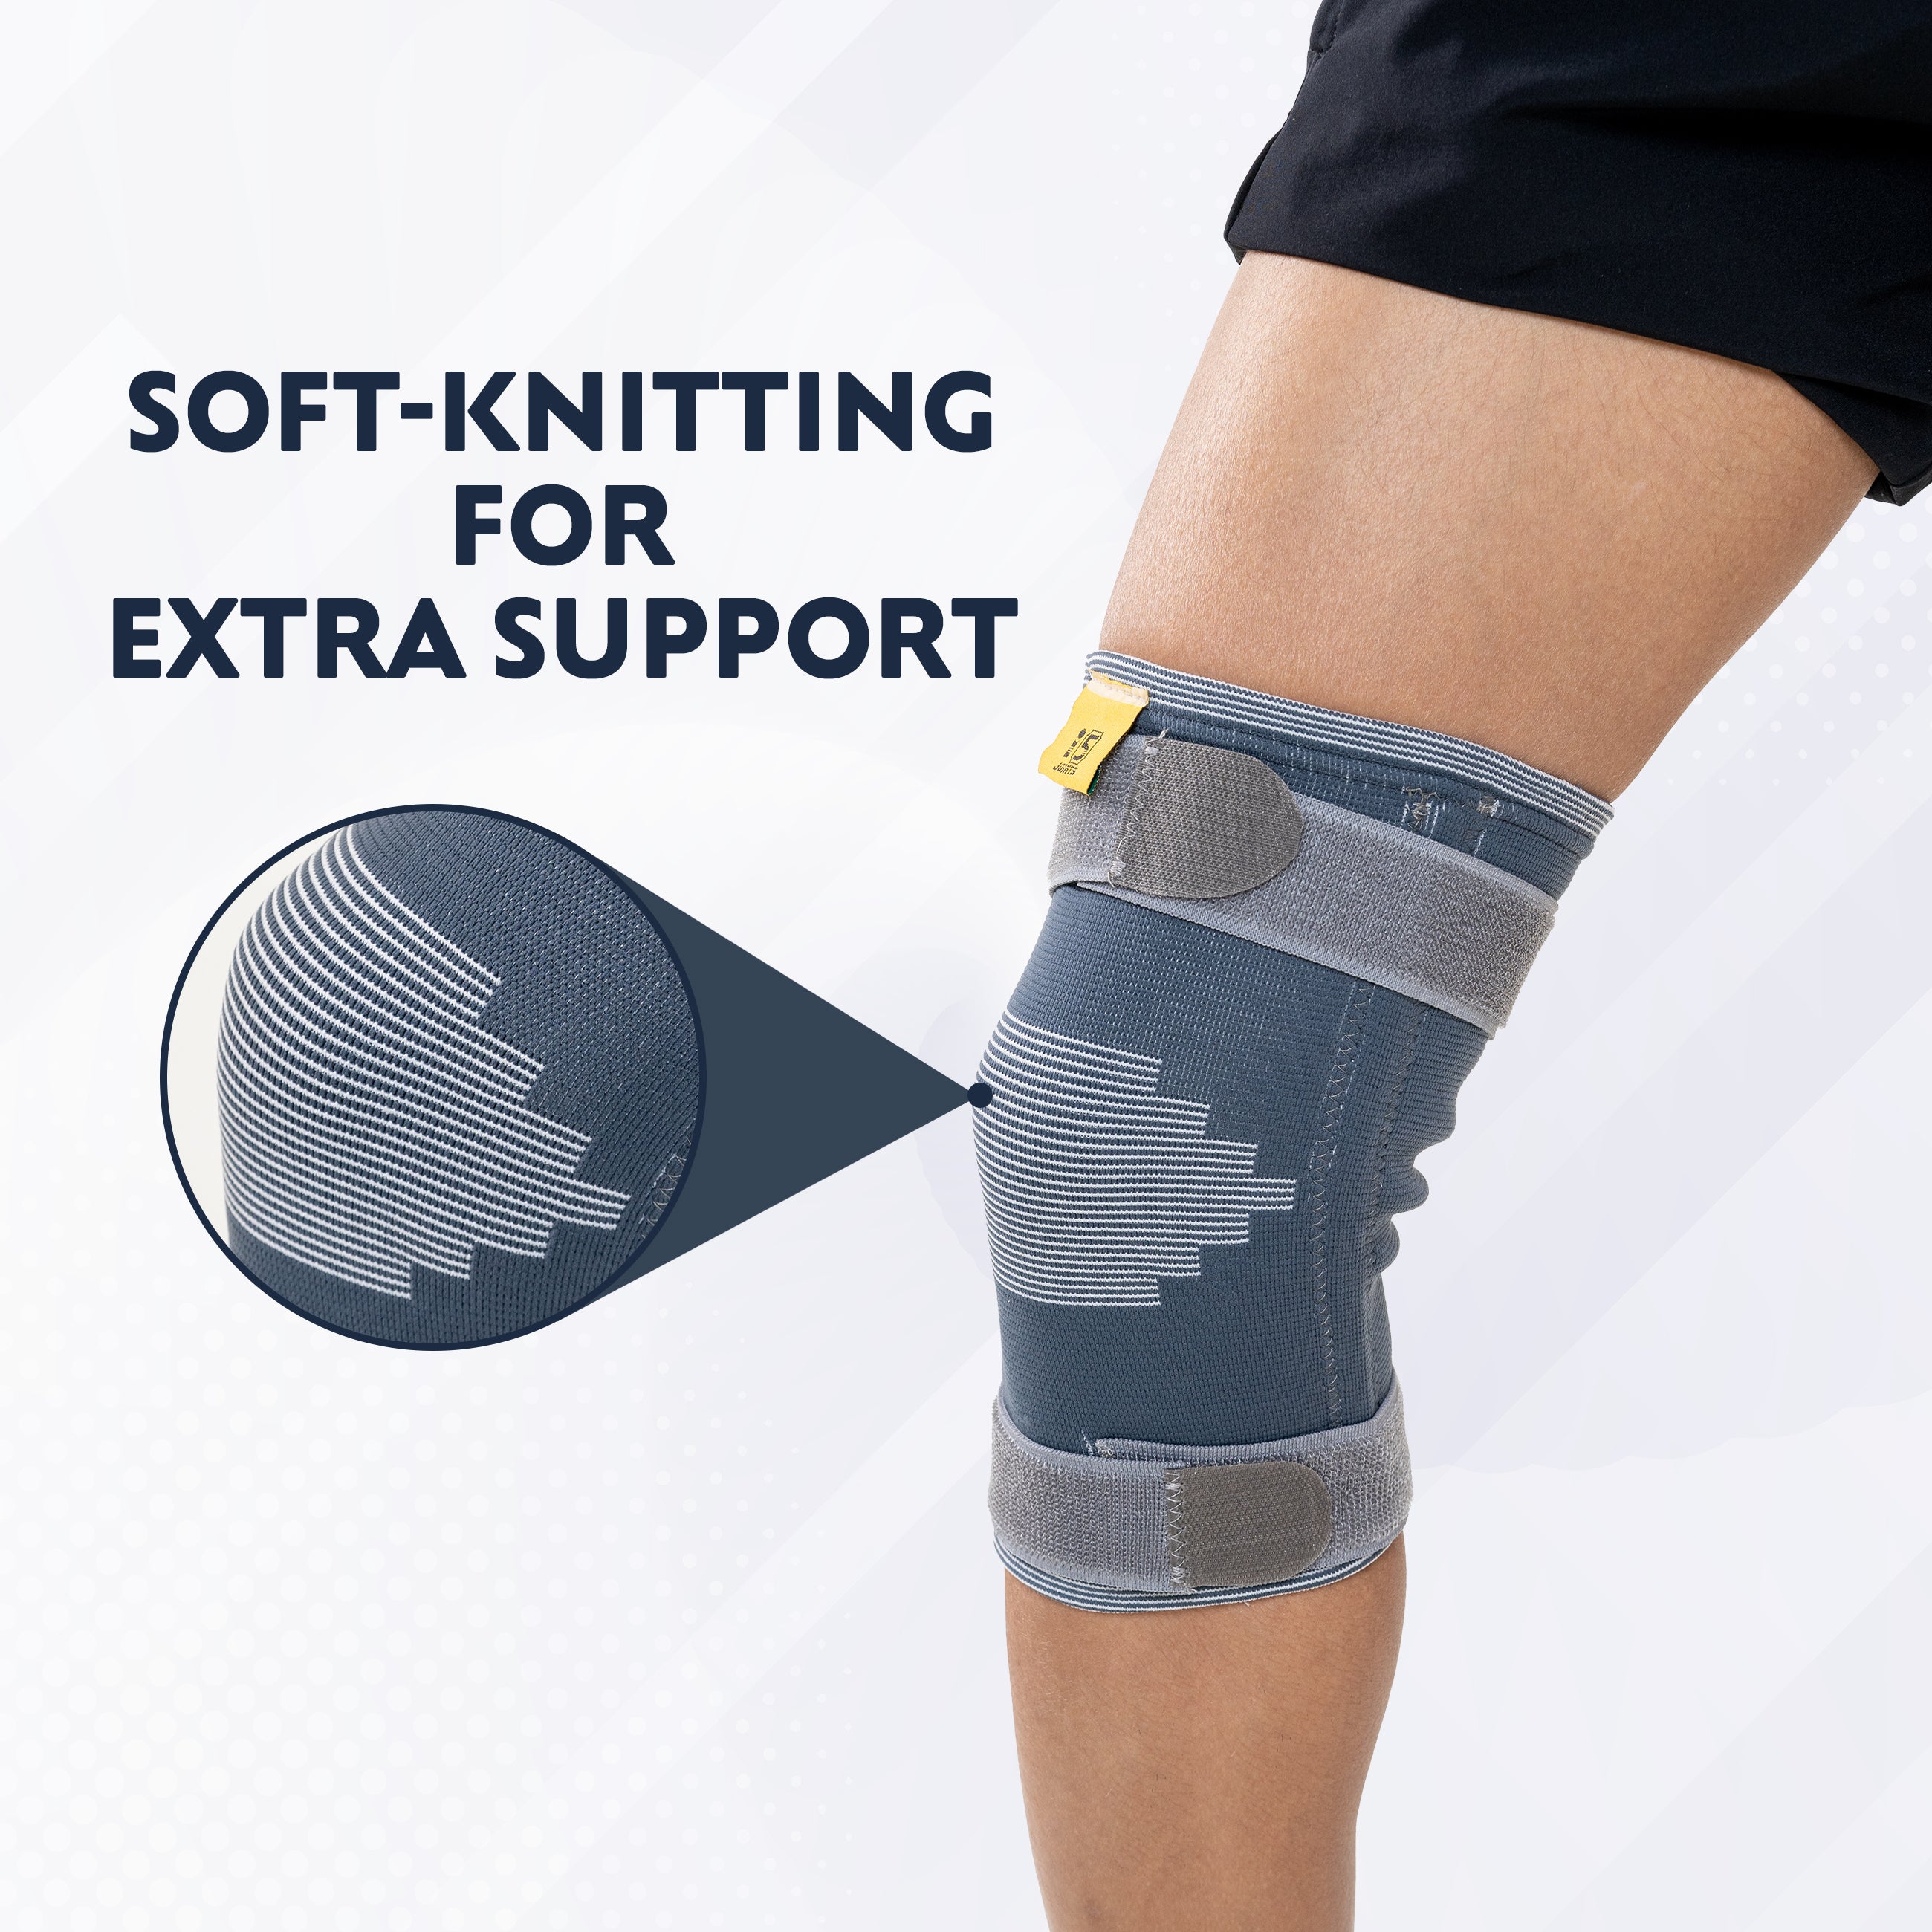 I5Joints –Elastotech Knee Support(I5Joints Premium Knee, Breathable Pain Relief, Sports for Men & Women )